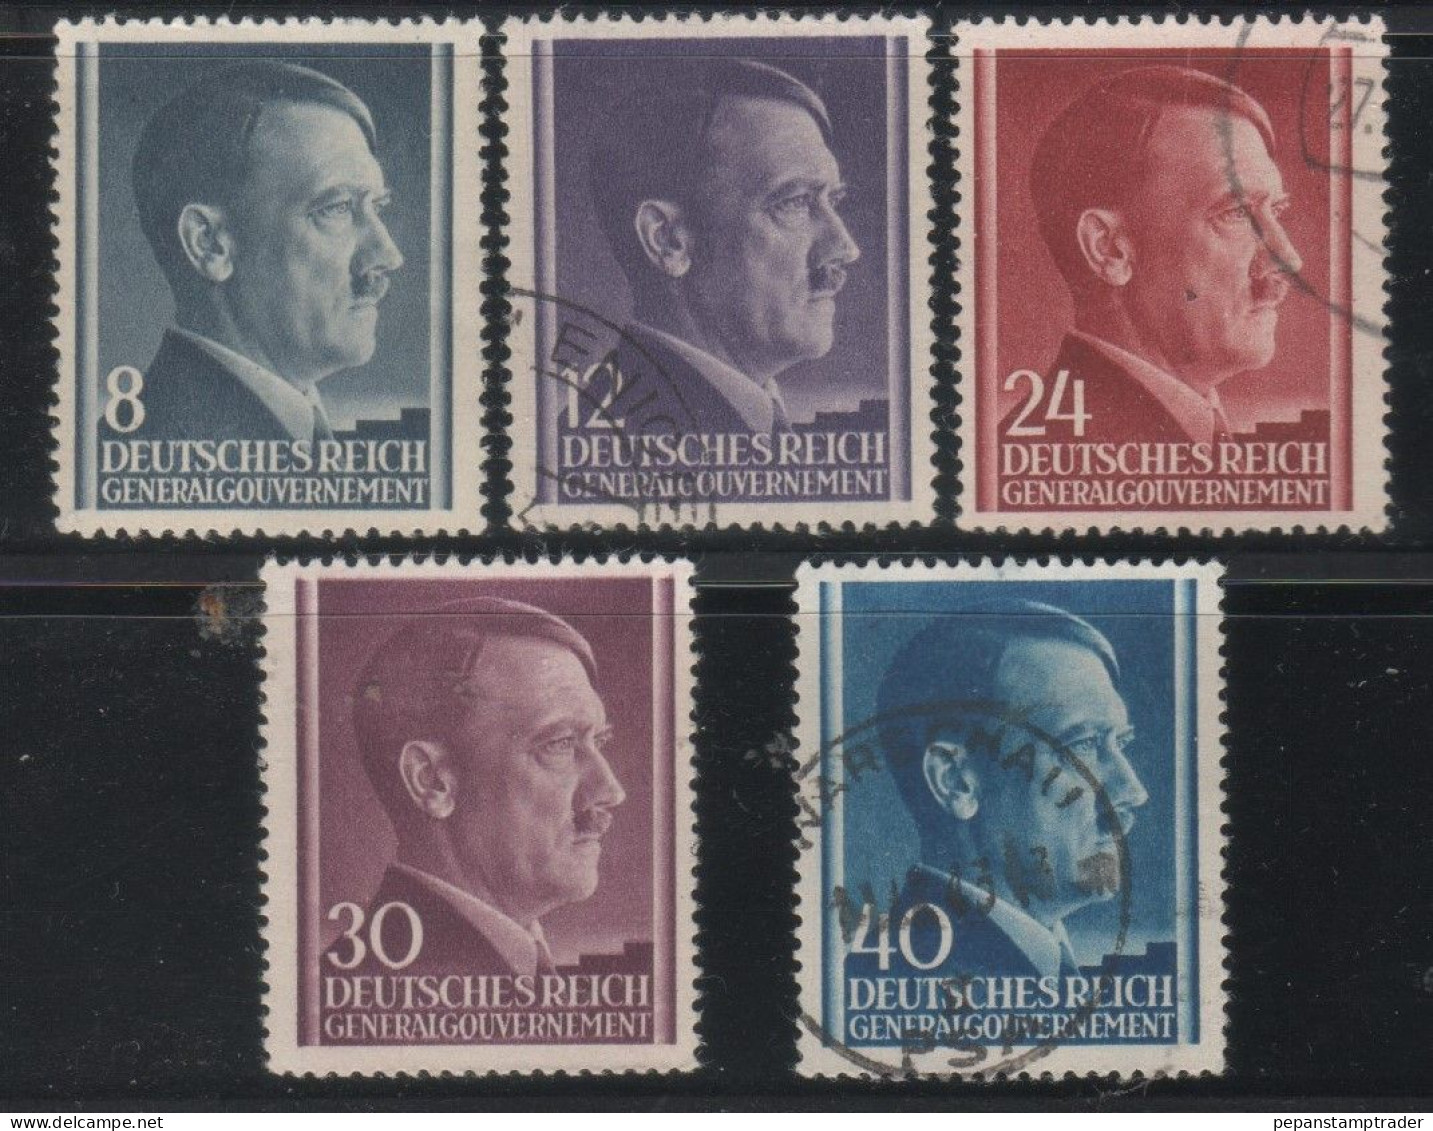 Poland - #N78+80+3+4+6 - Used - General Government